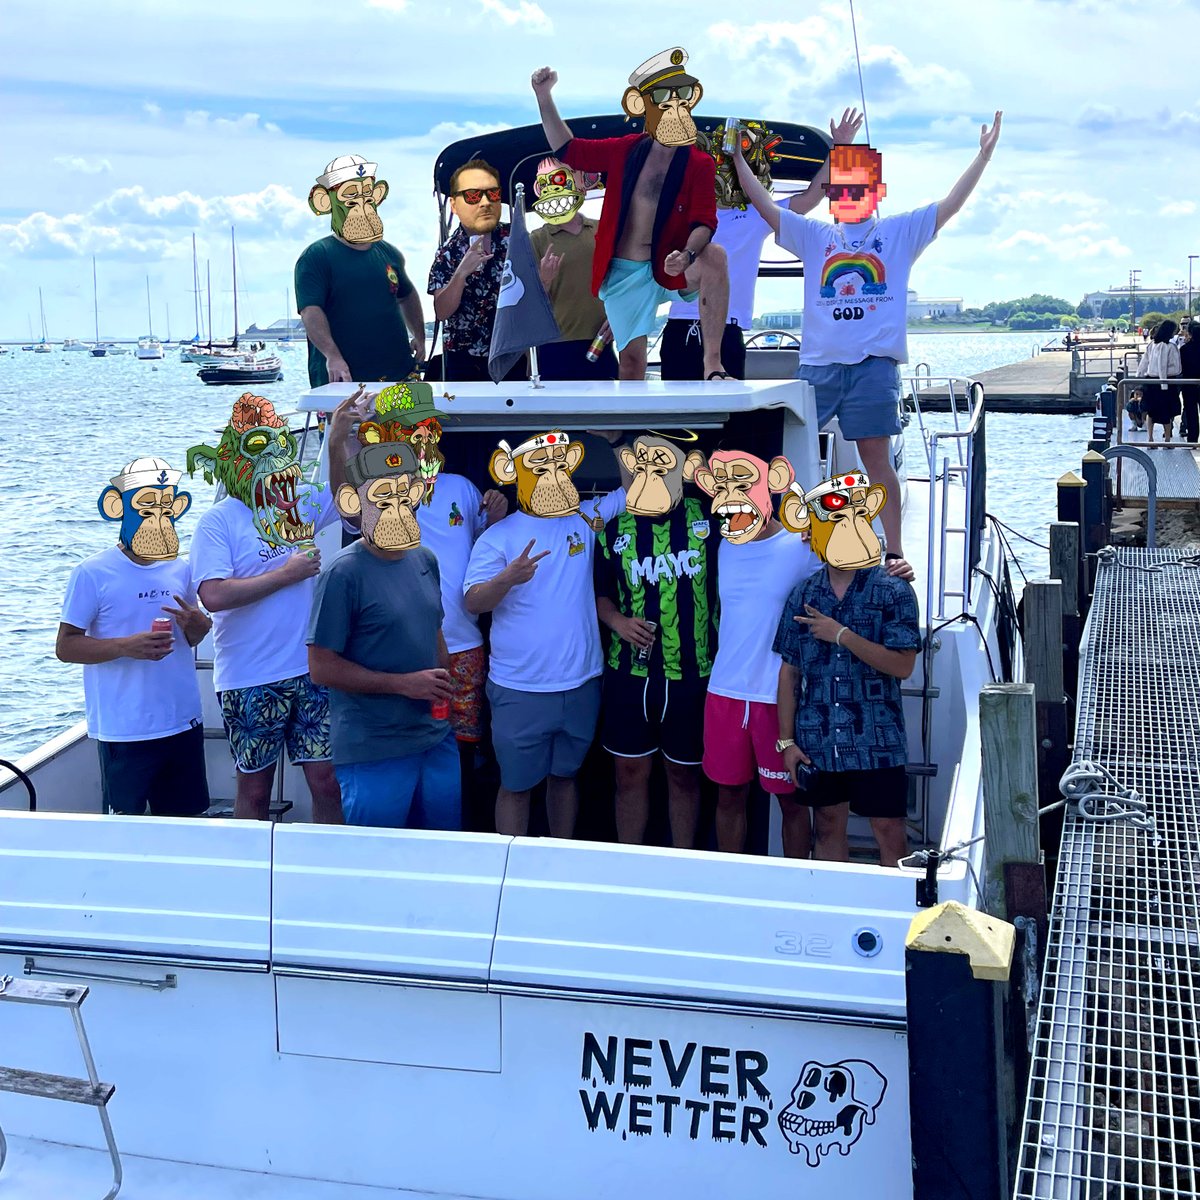 Part of the initial draw to @BoredApeYC for me back in April 2021 was that I was starting to get into boating and I've wanted to have a boat full of apes out on Lake Michigan ever since Last Friday, 13 Apes (& two non-apes) descended upon the Never Wetter and made it happen 🍻